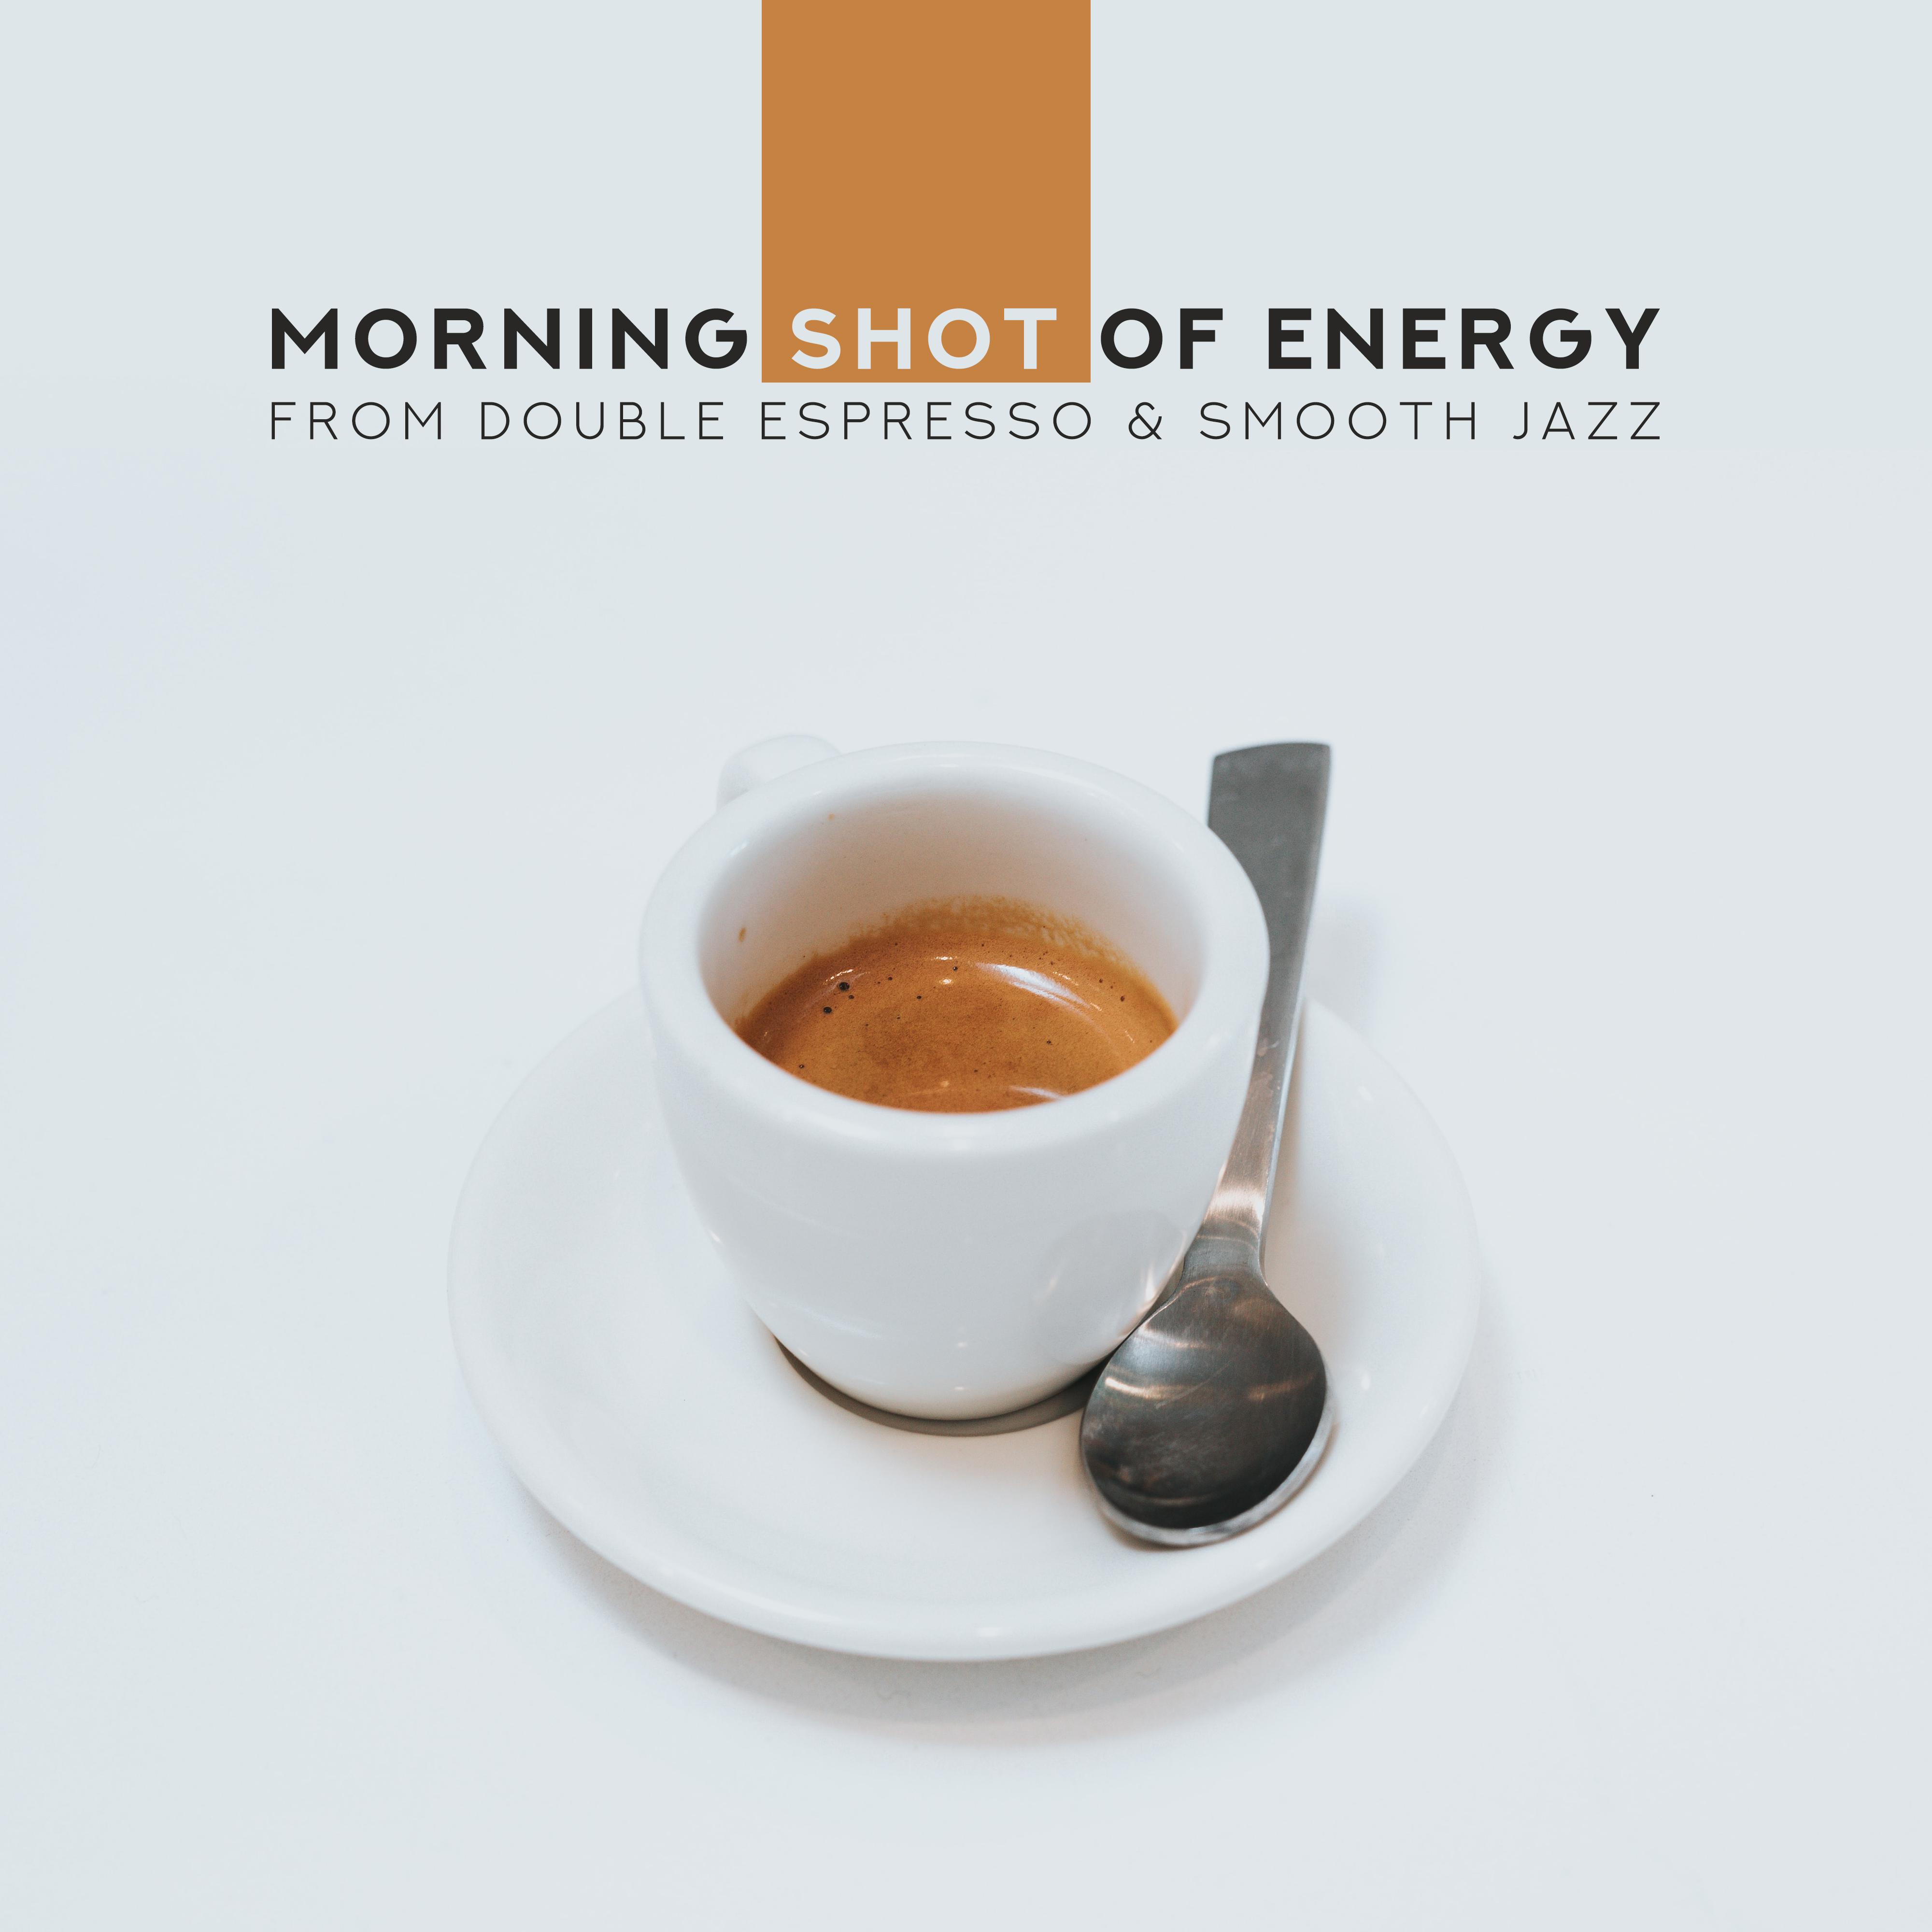 Morning Shot of Energy from Double Espresso & Smooth Jazz: 2019 Energetic Instrumental Smooth Jazz Music, Happy Relaxing Songs, Vintage Melodies Played on Trombone, Trumpet, Sax & Many More